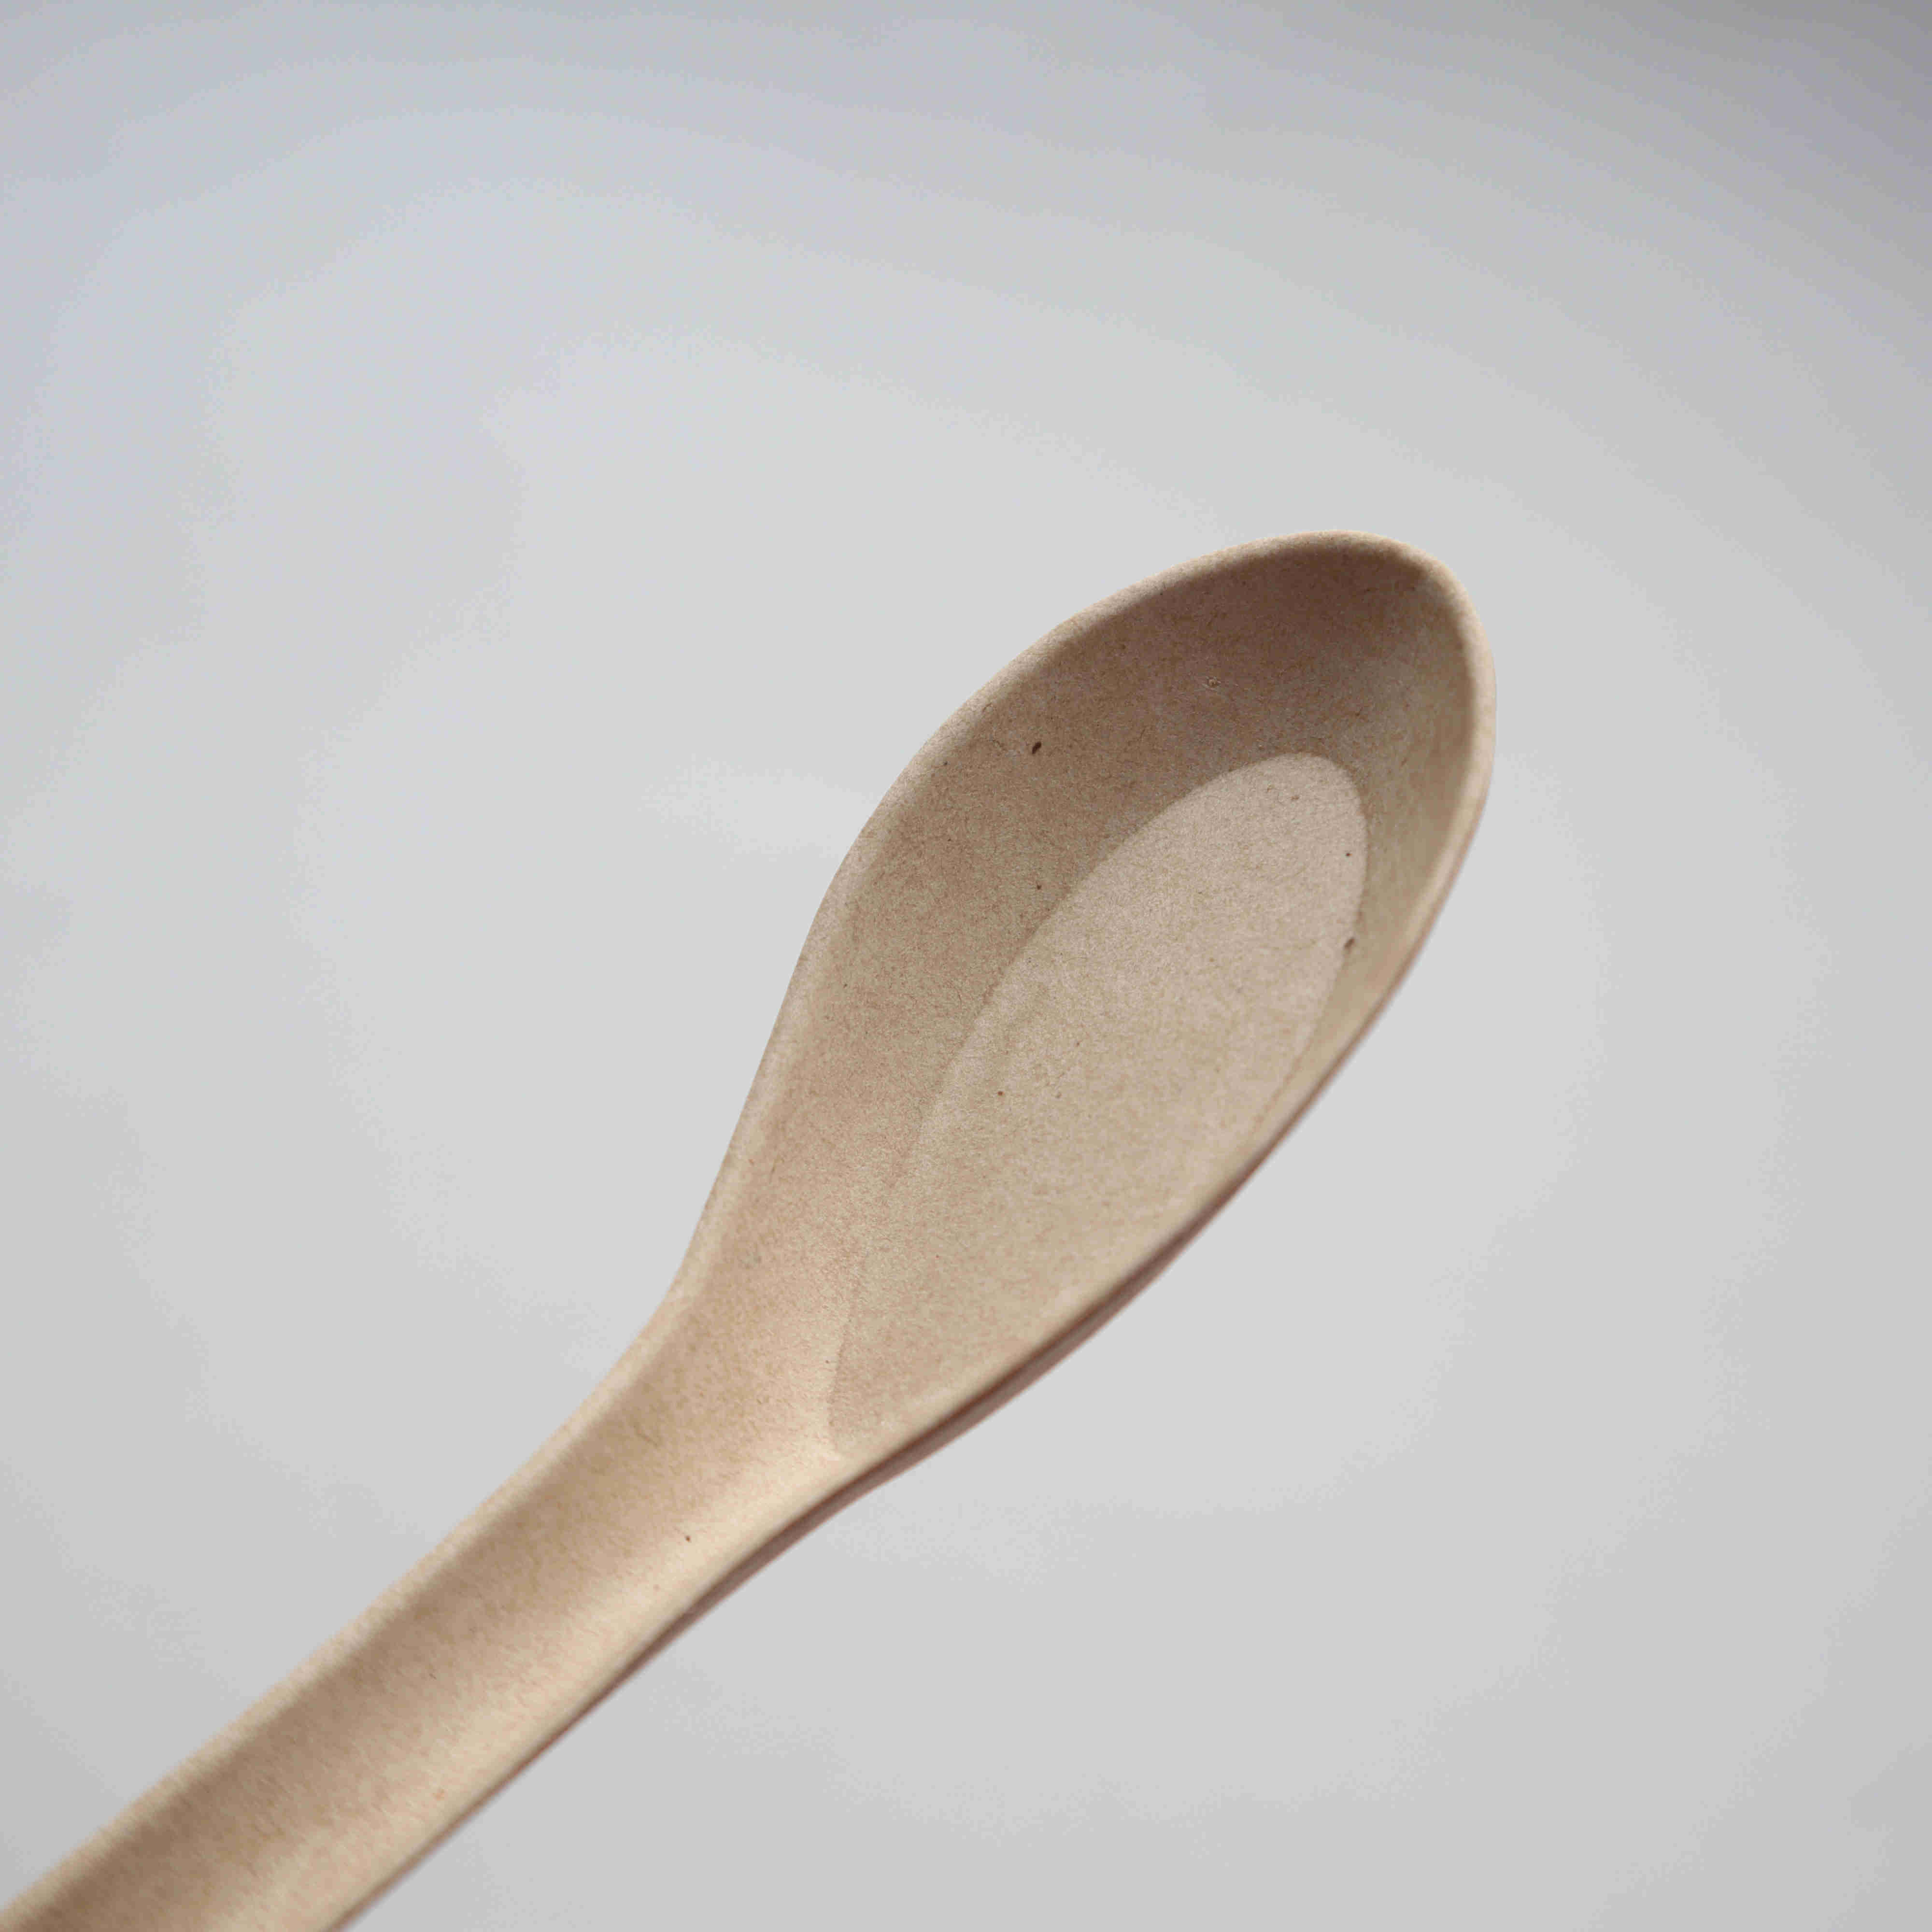 Disposable compostable spoon for dinner from GREENOLIVE